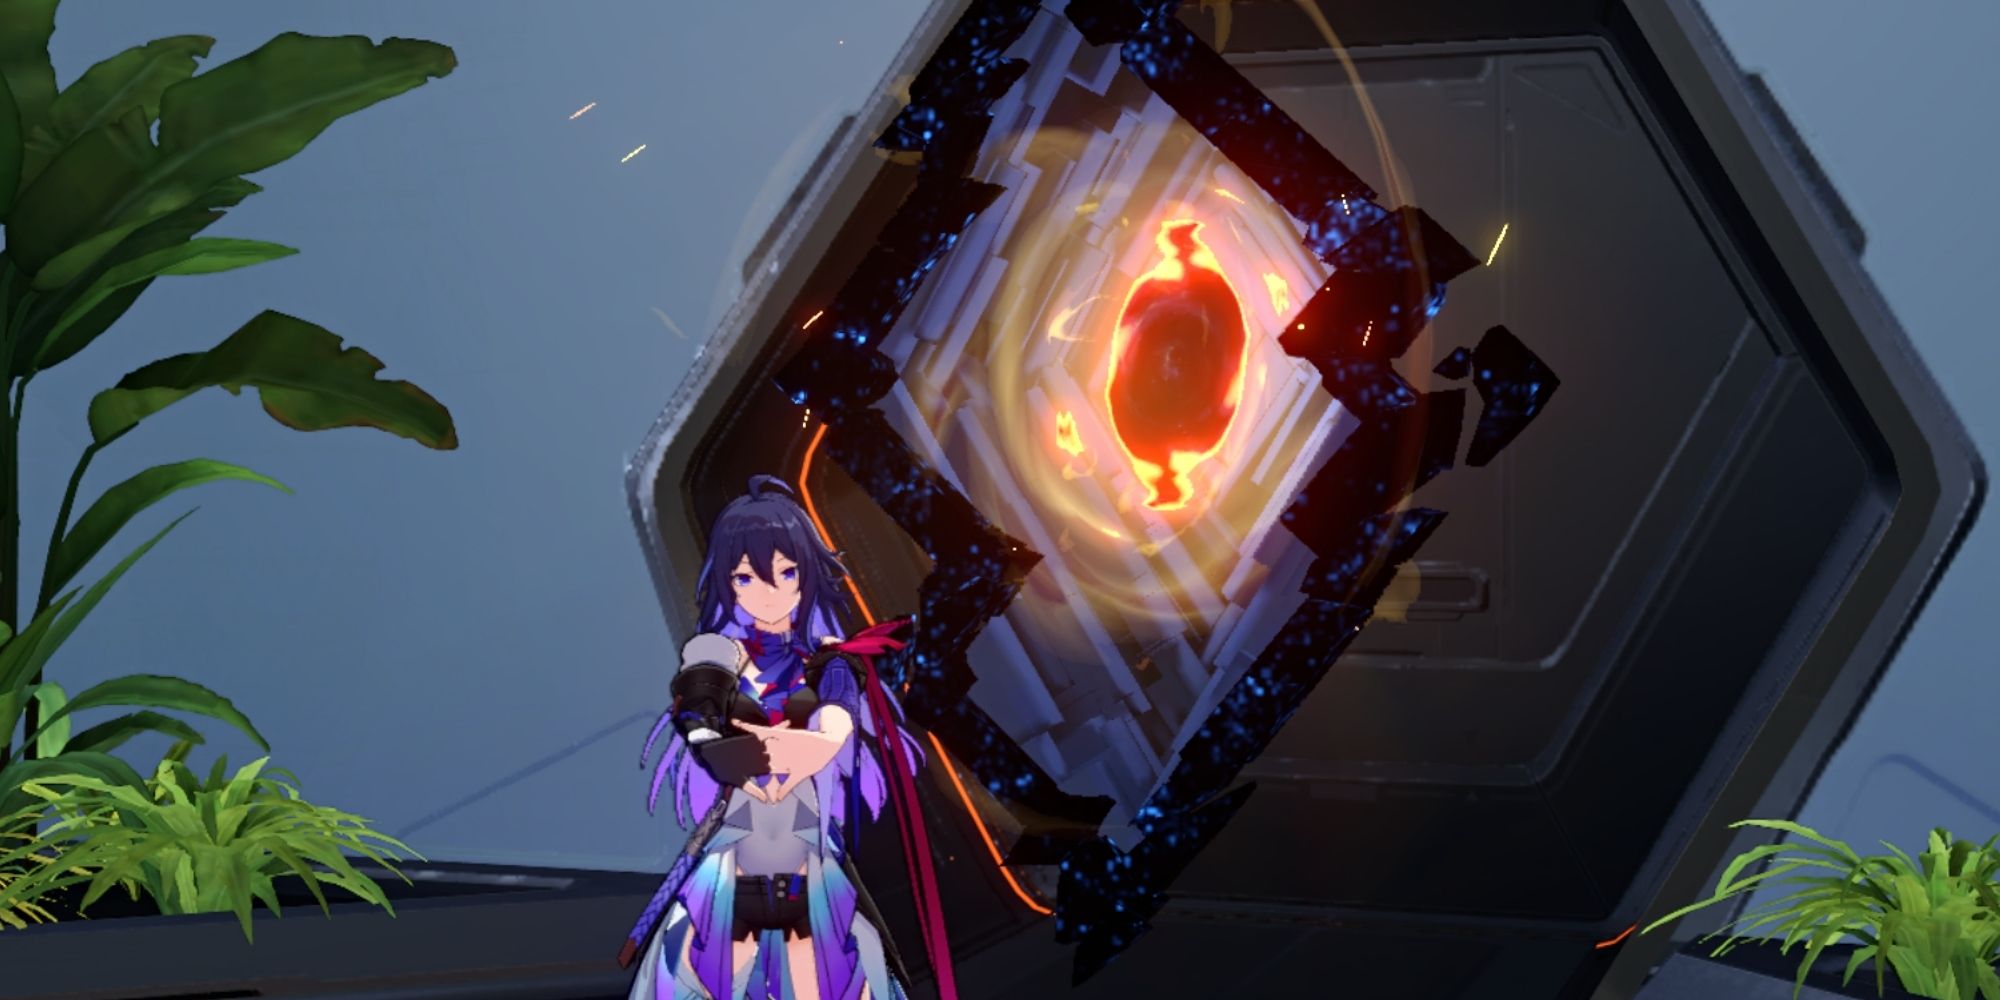 Honkai Star Rail's Seele stretching in front of a Cavern of Corrosion inside Herta Space Station.